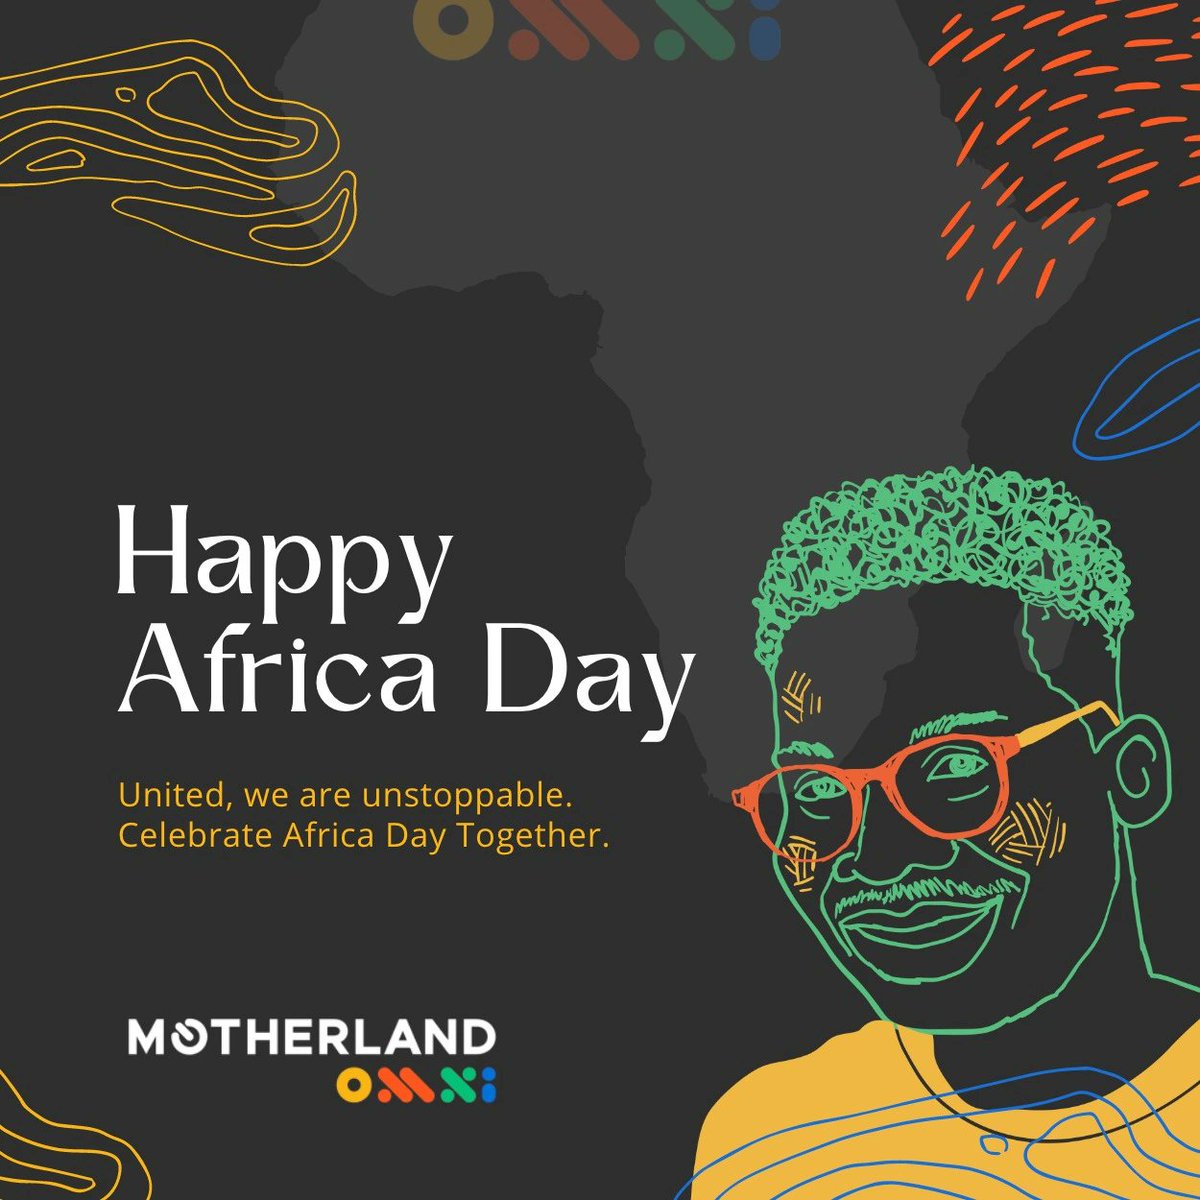 Let’s reflect on our shared journey, embrace our unique identities and envision a future where Africa's influence continues to thrive. 
Happy Africa Day!! 

#AfricaDay #MotherlandOMNi #UnityInDiversity #CelebratingAfrica #EmpoweringCommunities #AfricanPride #ResilientAfrica